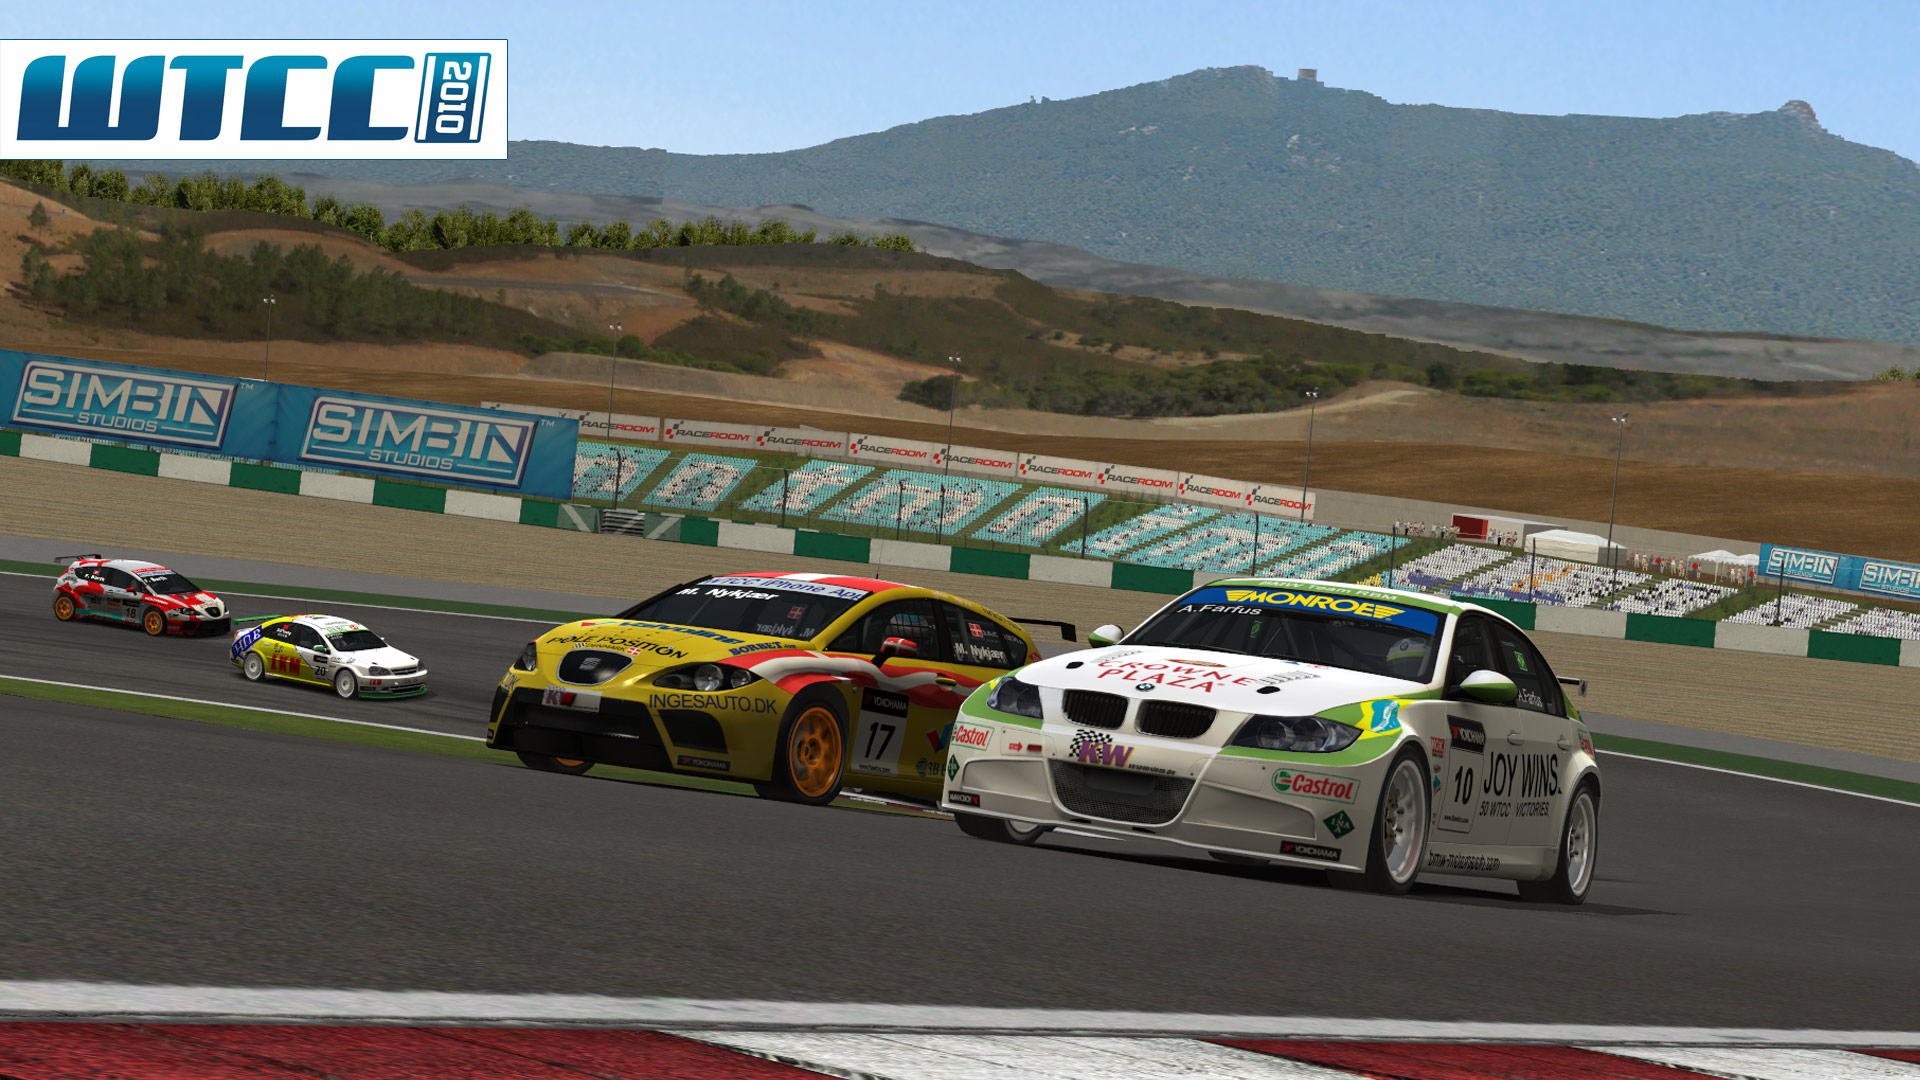 WTCC 2010 – Expansion Pack for RACE 07 screenshot